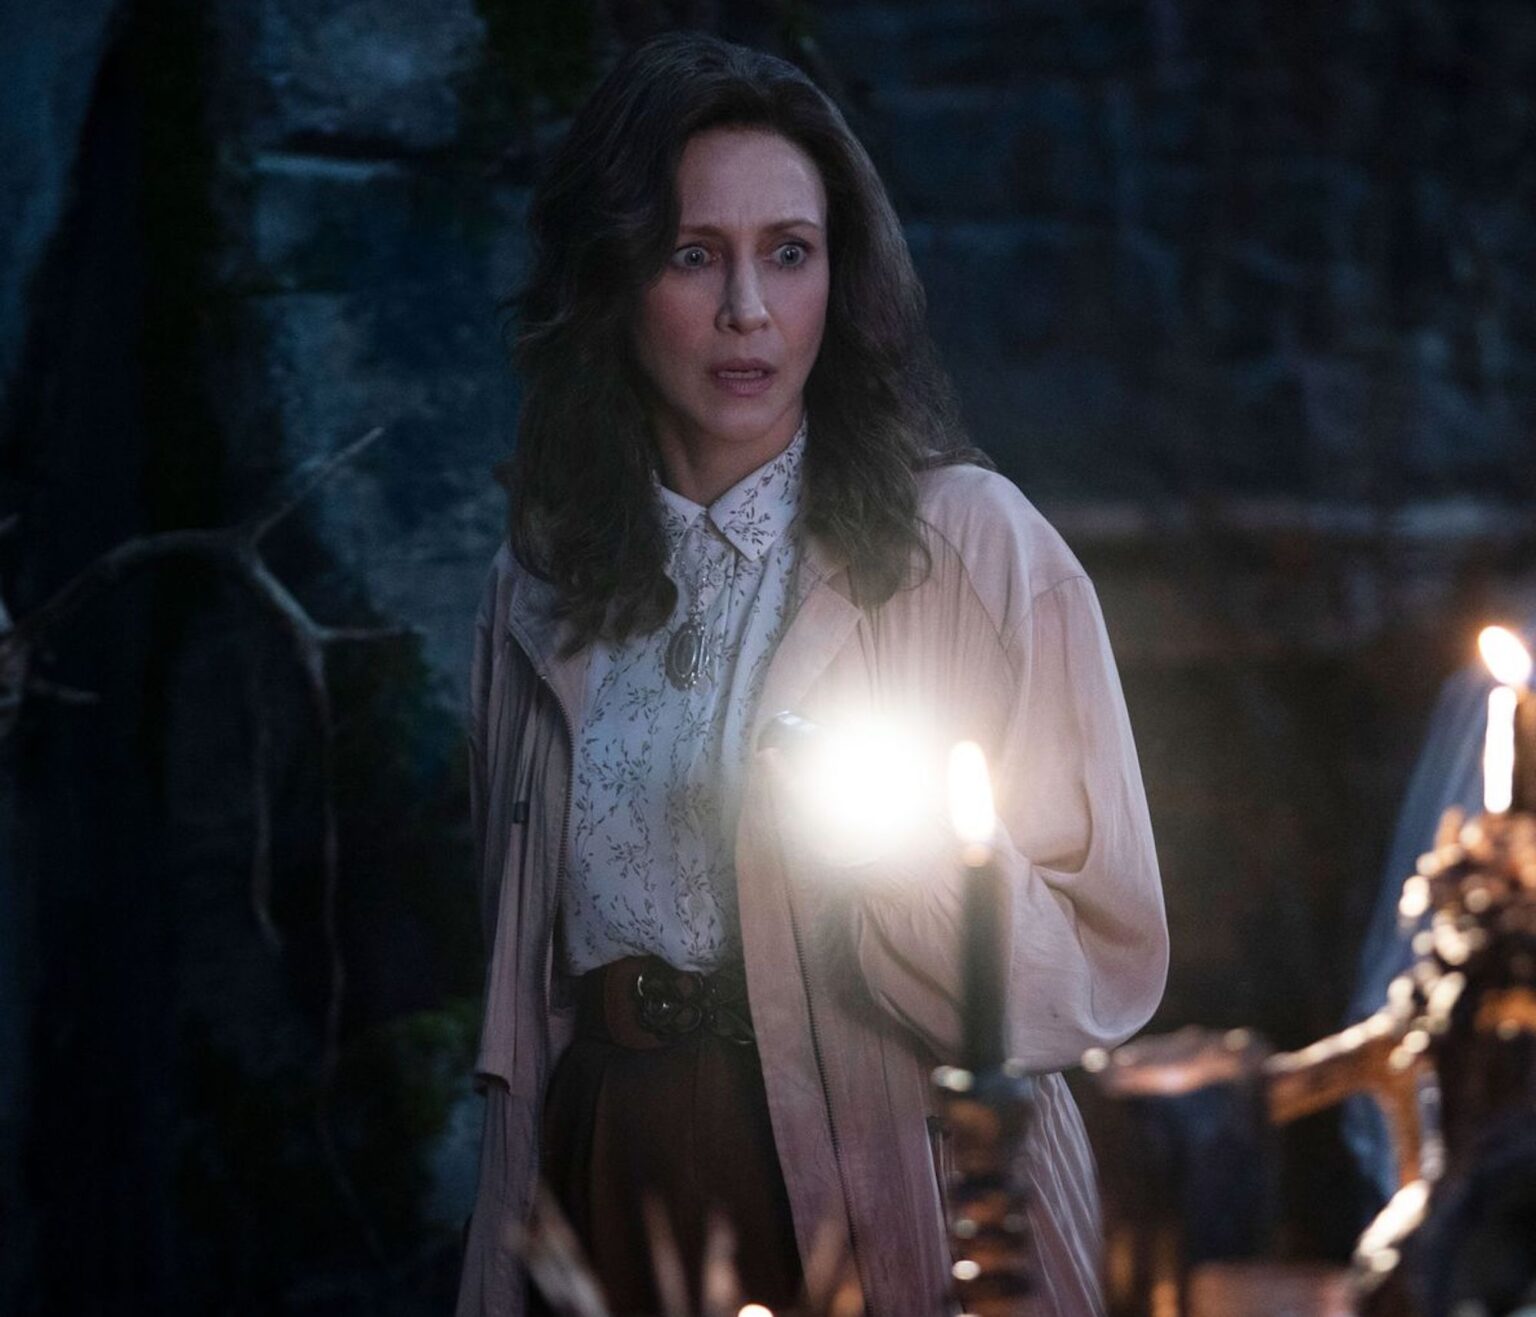 The latest from the series, 'The Conjuring: The Devil Made Me Do It' is 2021's best horror film yet. See how and where you can watch it for free!